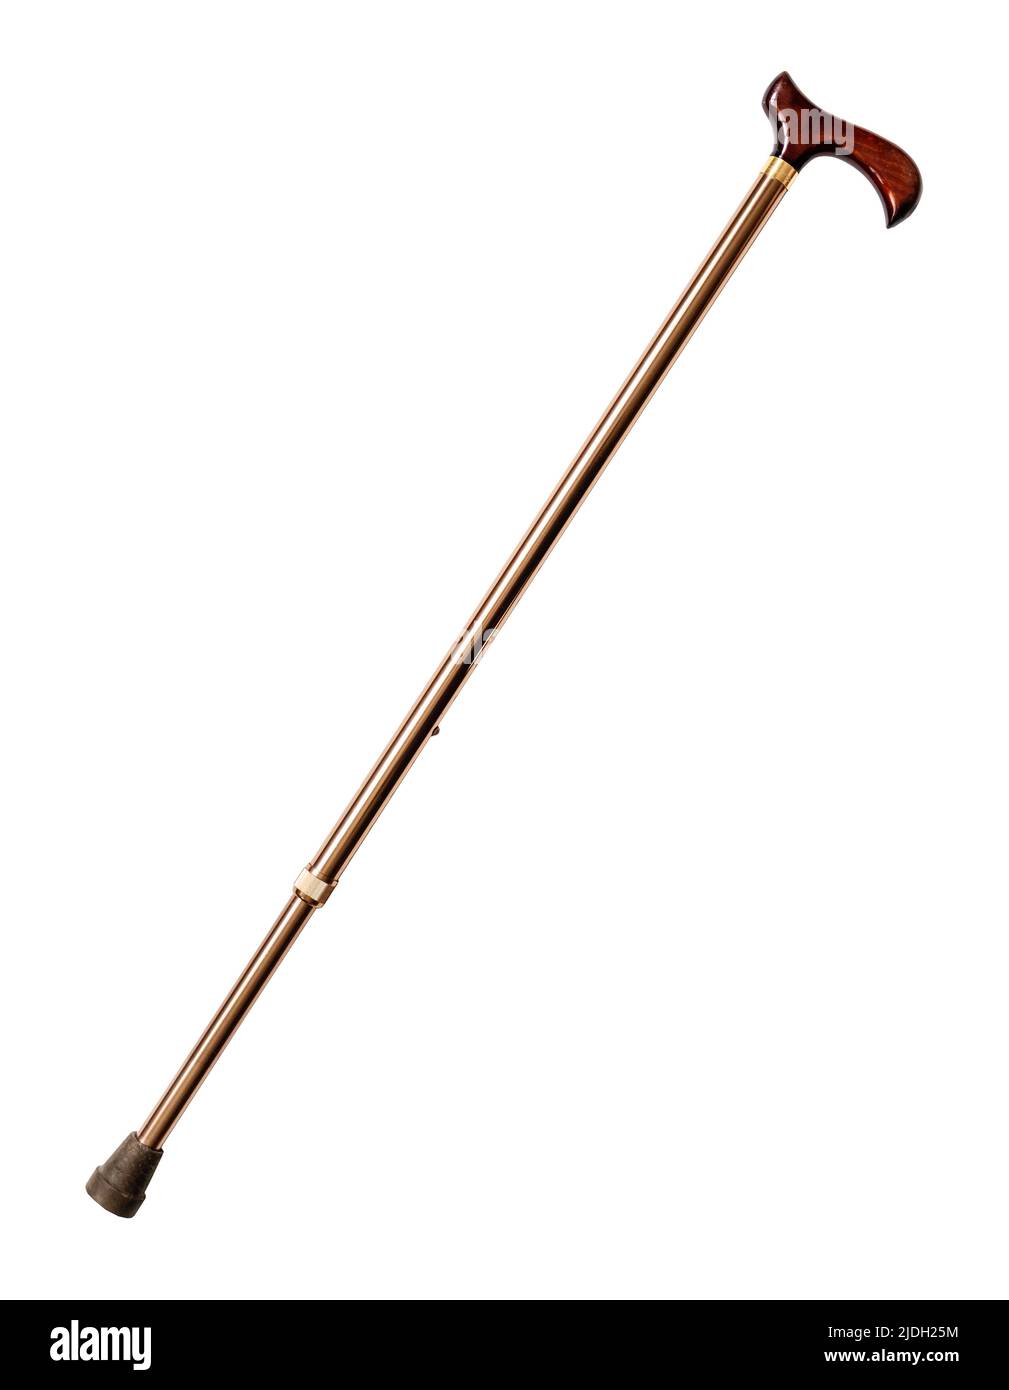 extendable brass walking cane with wooden derby handle cutout on white background Stock Photo